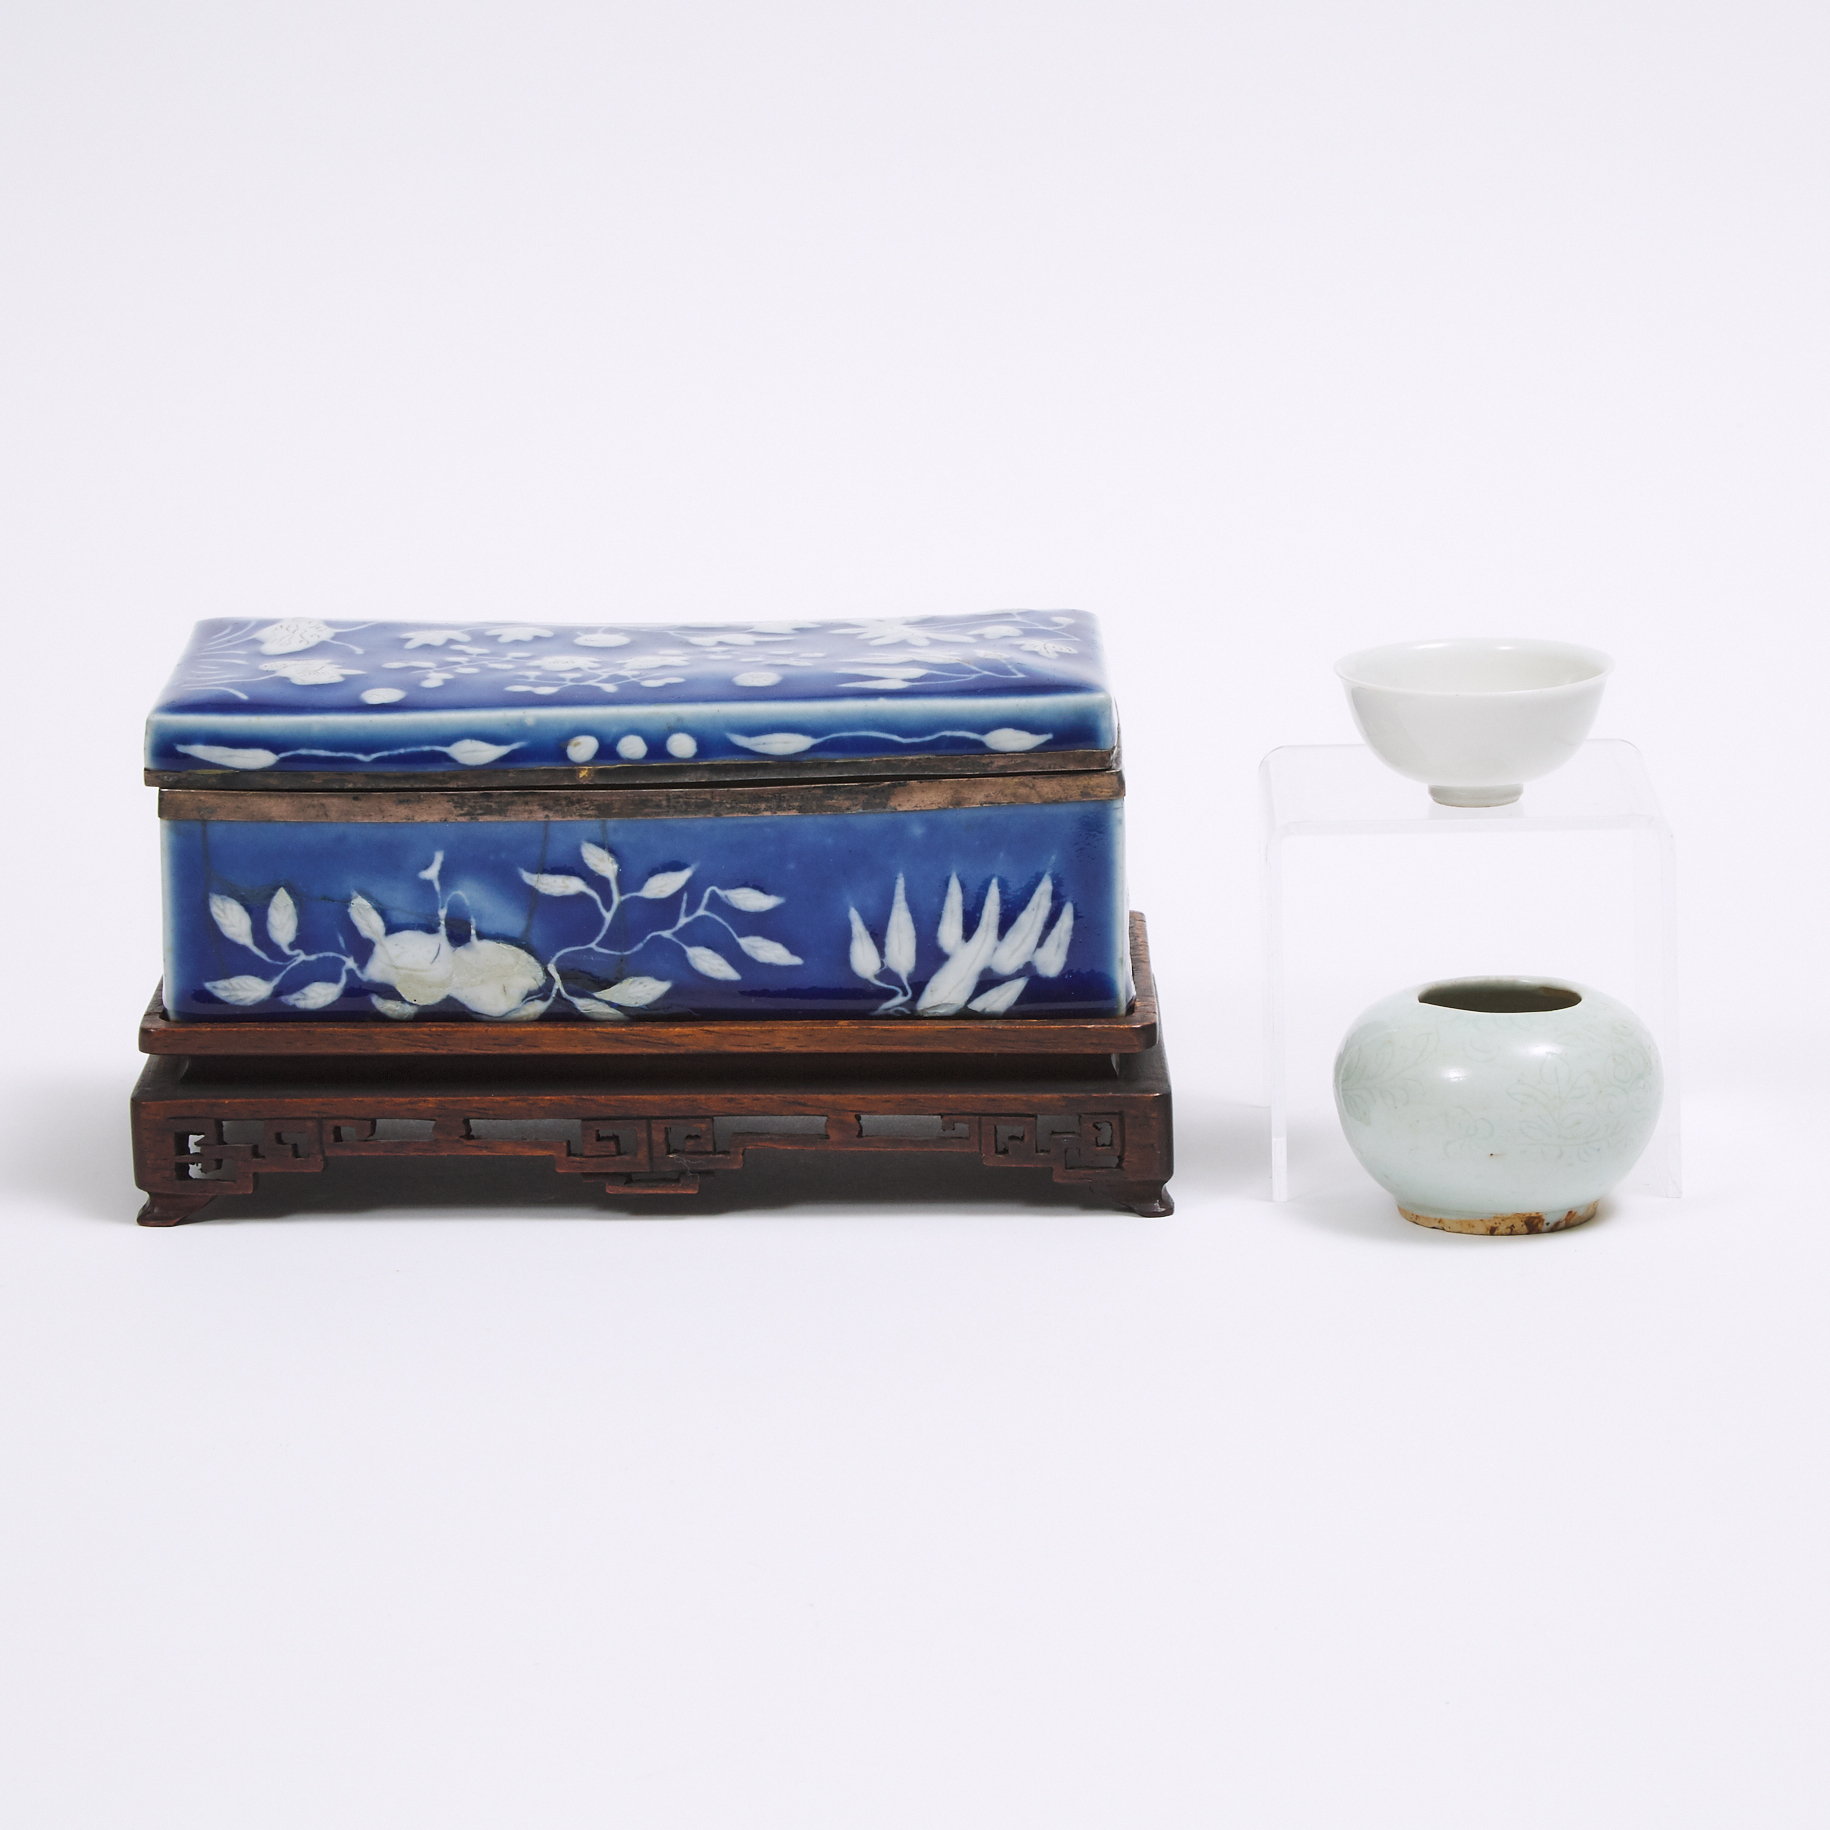 A Group of Three Chinese Porcelain Wares, Qing Dynasty